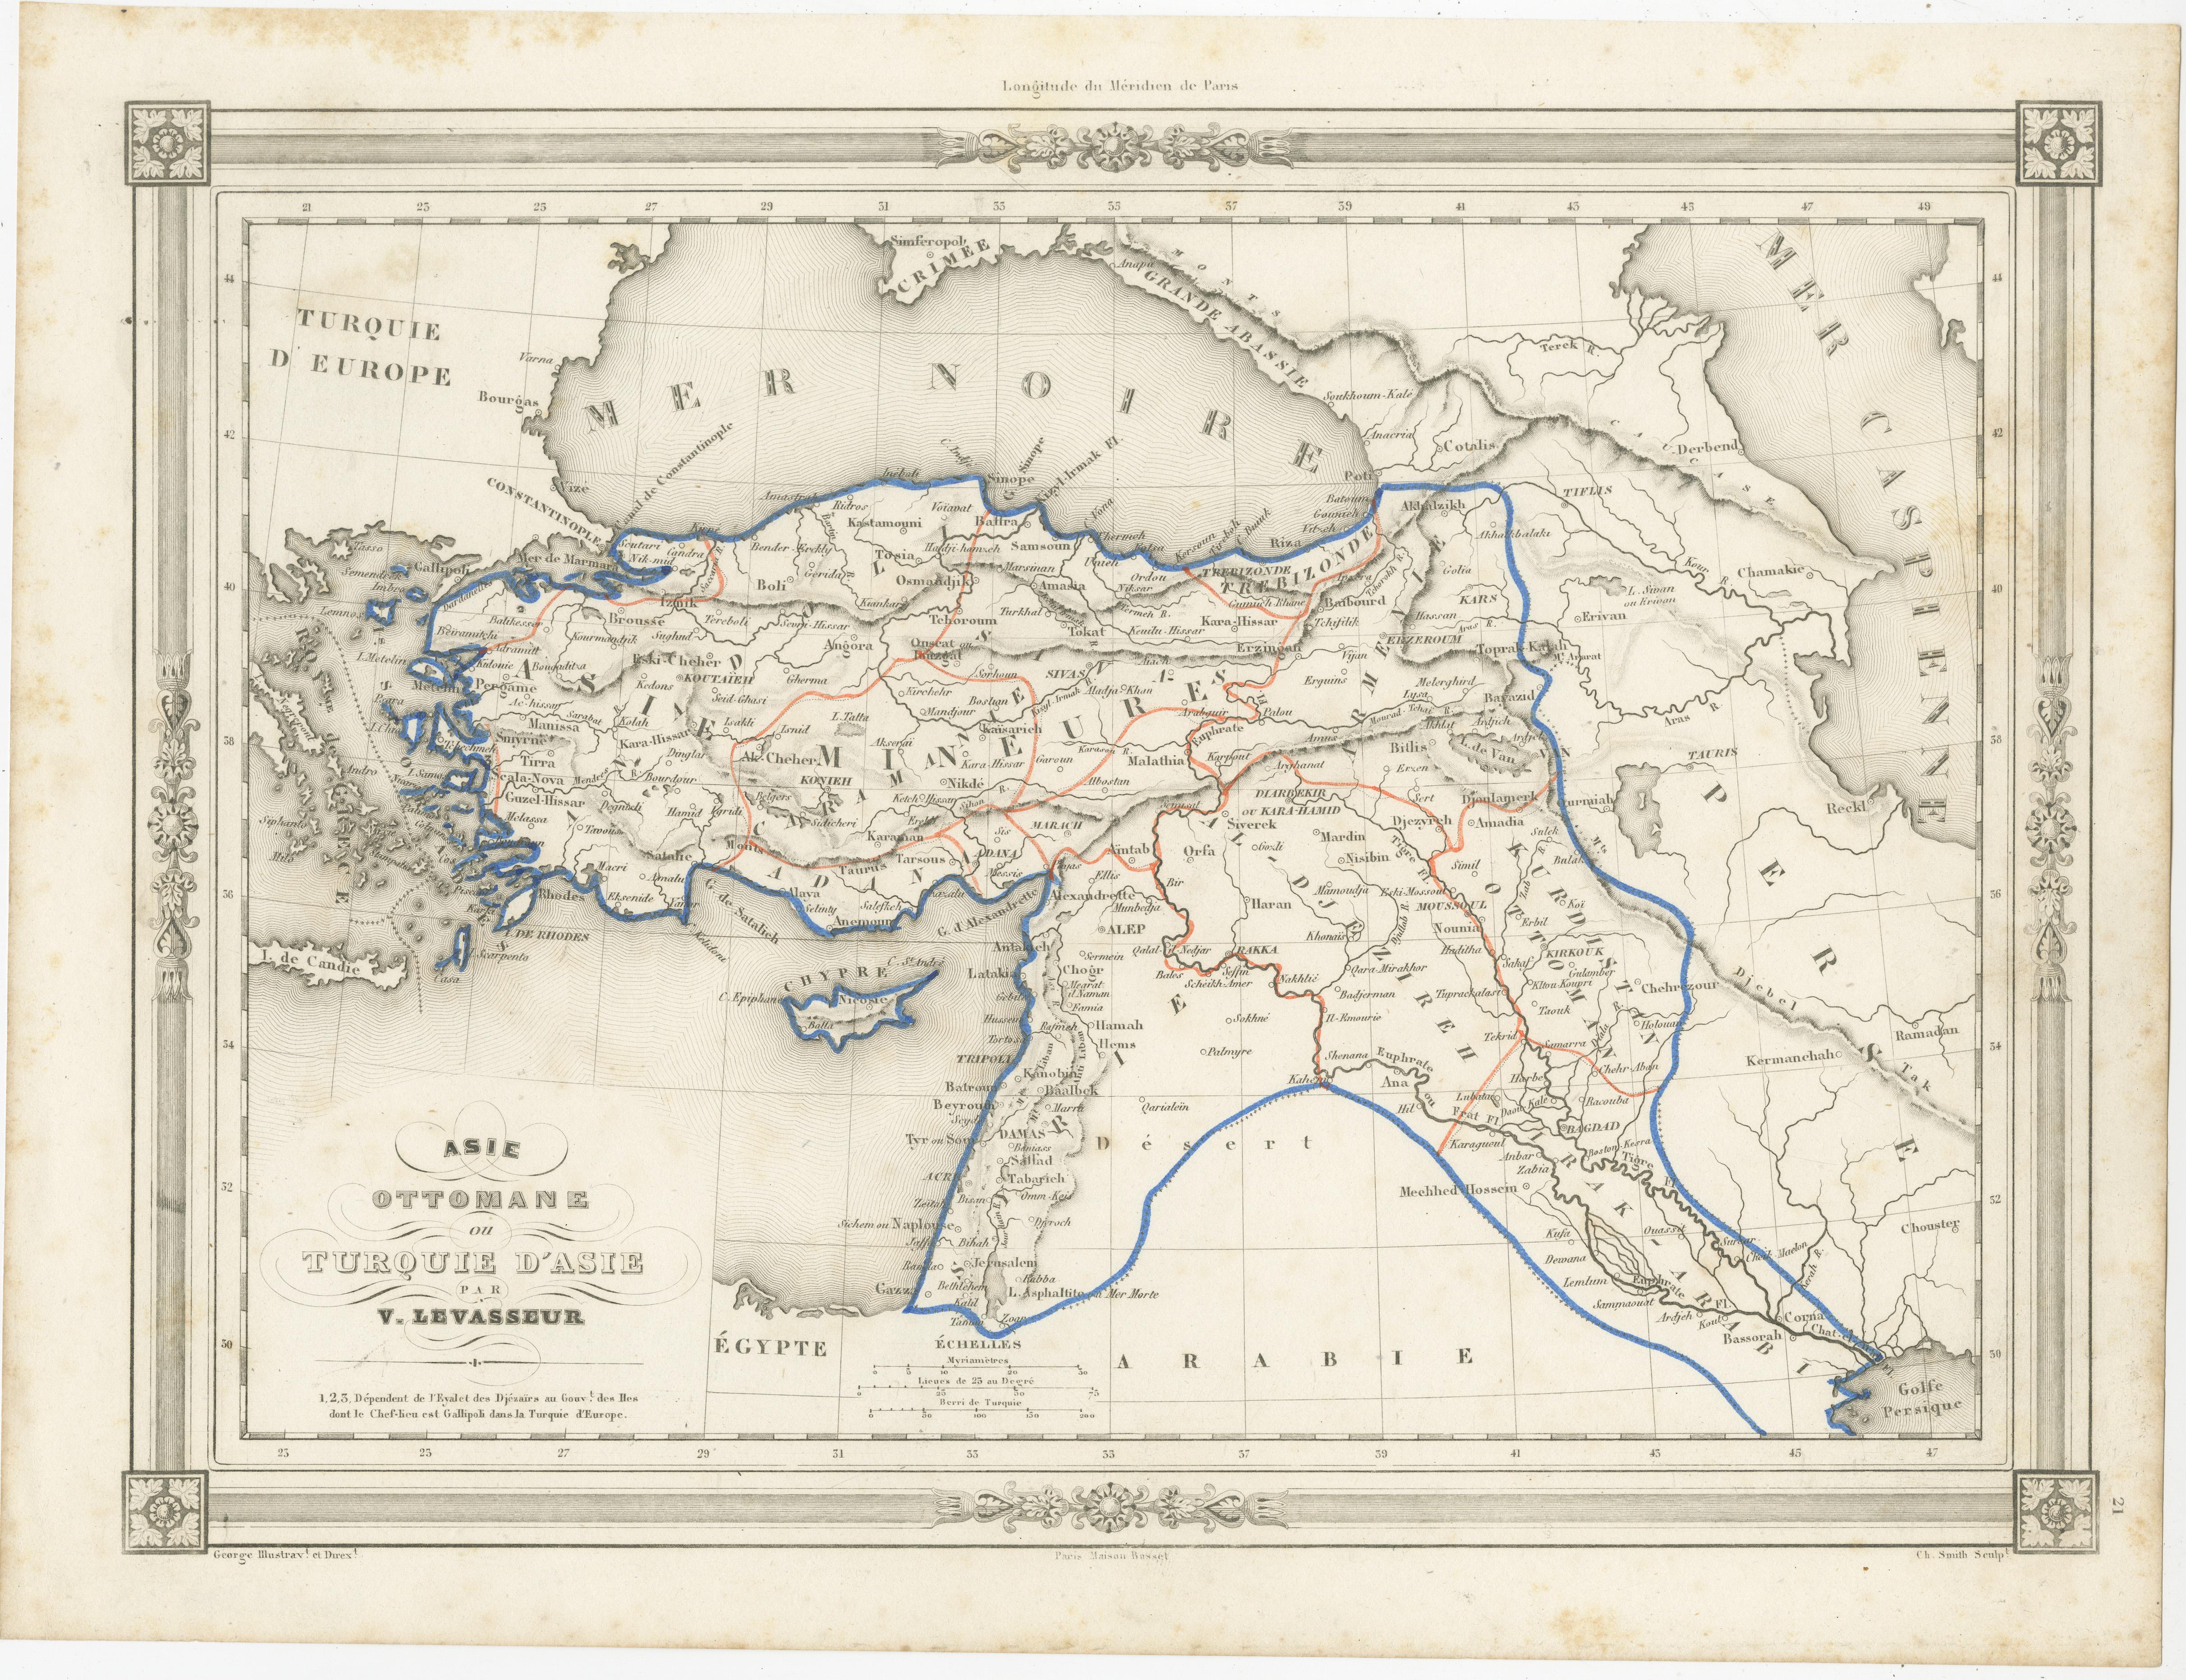 Antique map titled 'Asie Ottomane ou Turquie d'Asie'. Attractive map of Turkey in Asia. The map covers the Asian territories claimed by the Turkish Ottoman Empire c.1850 from the Black Sea to Arabia, including Cyprus. This map originates from Maison